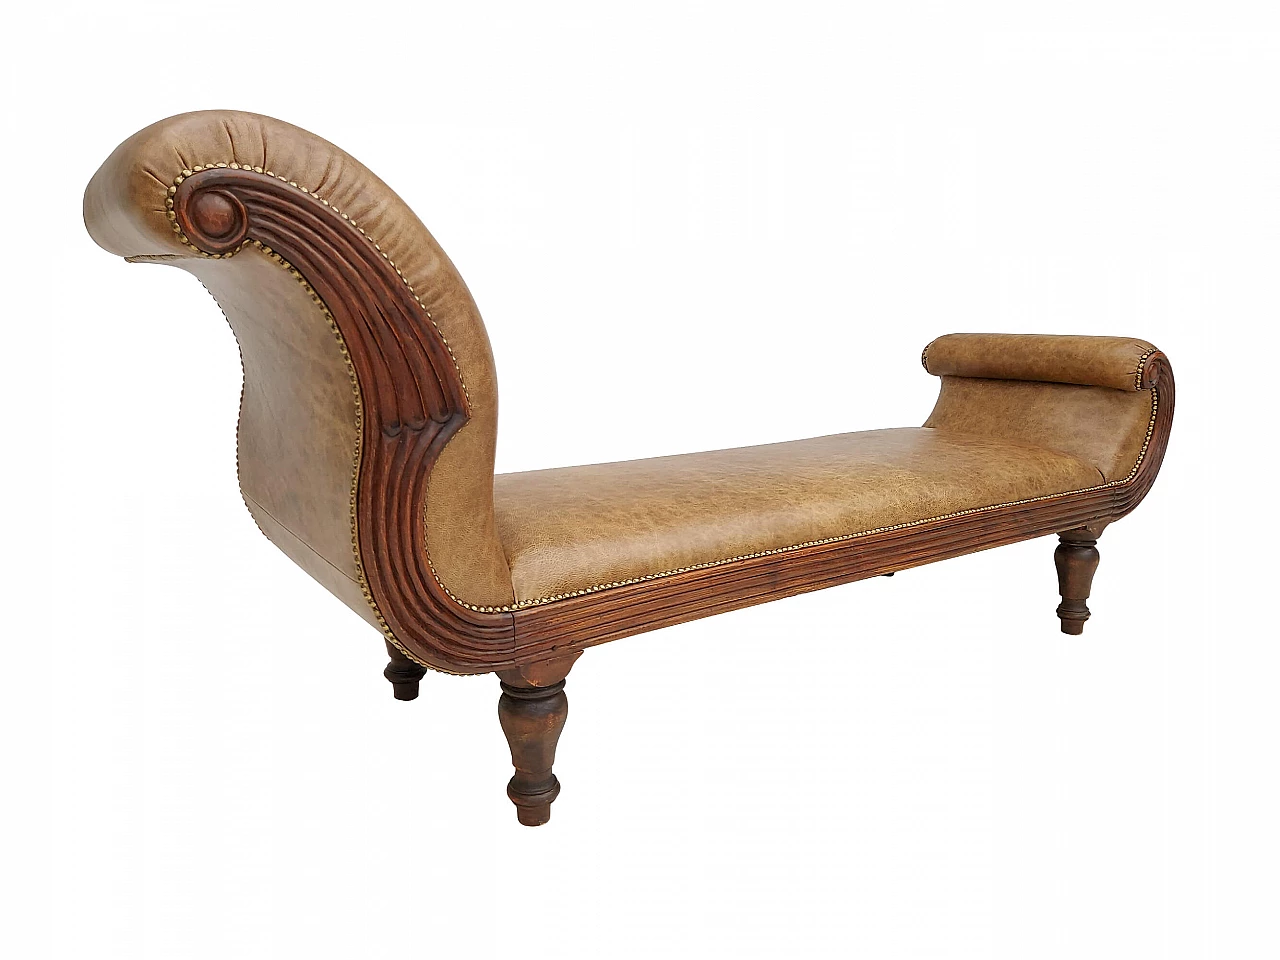 Danish antique chaise longue, early 20th century 1142319